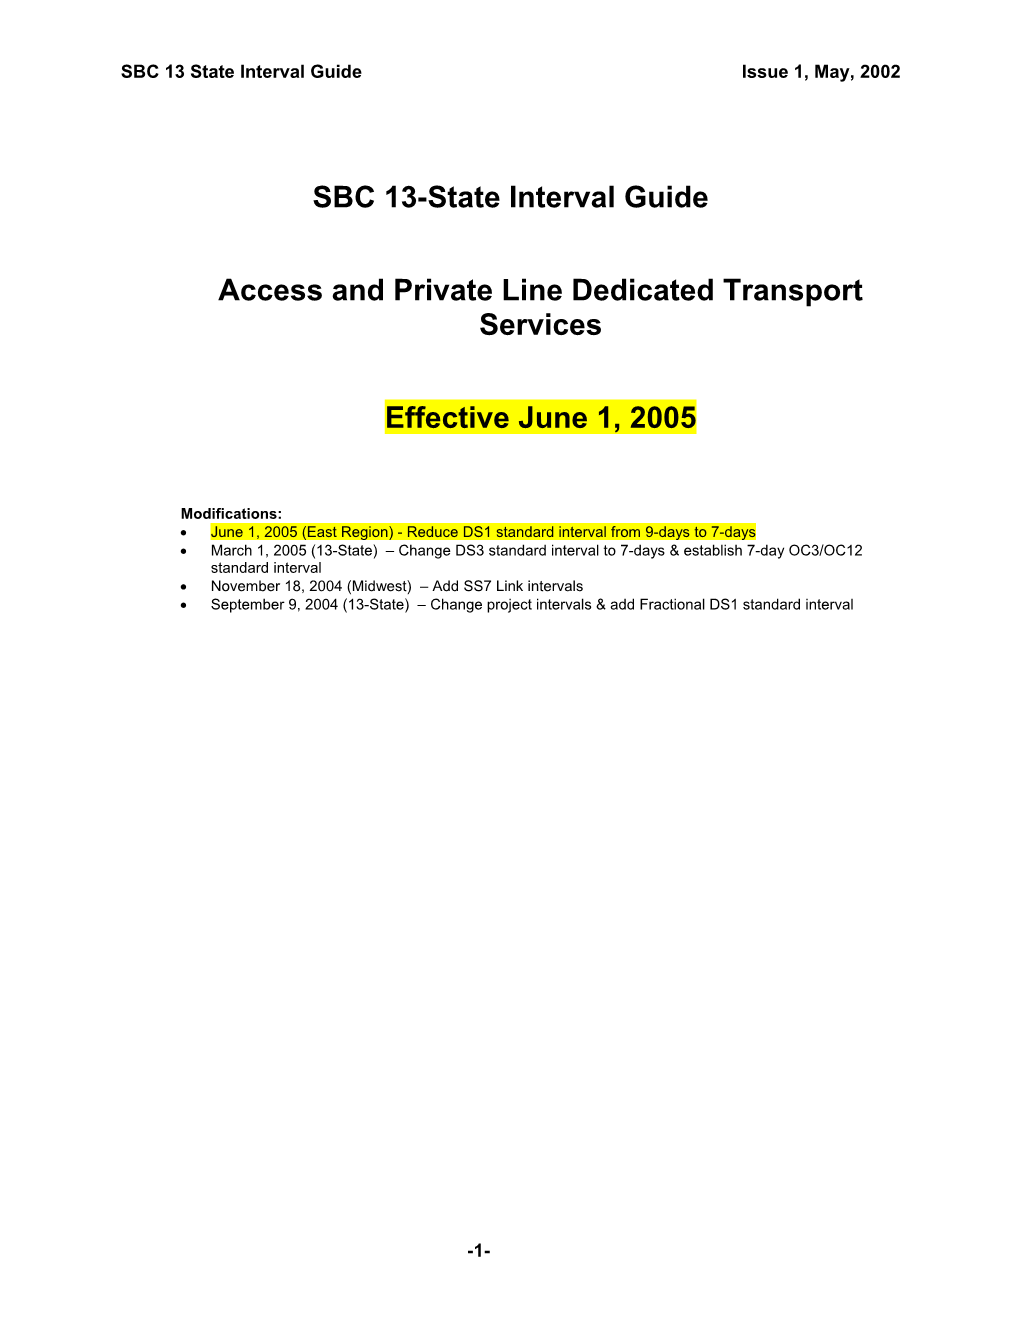 SBC 13-State Interval Guide